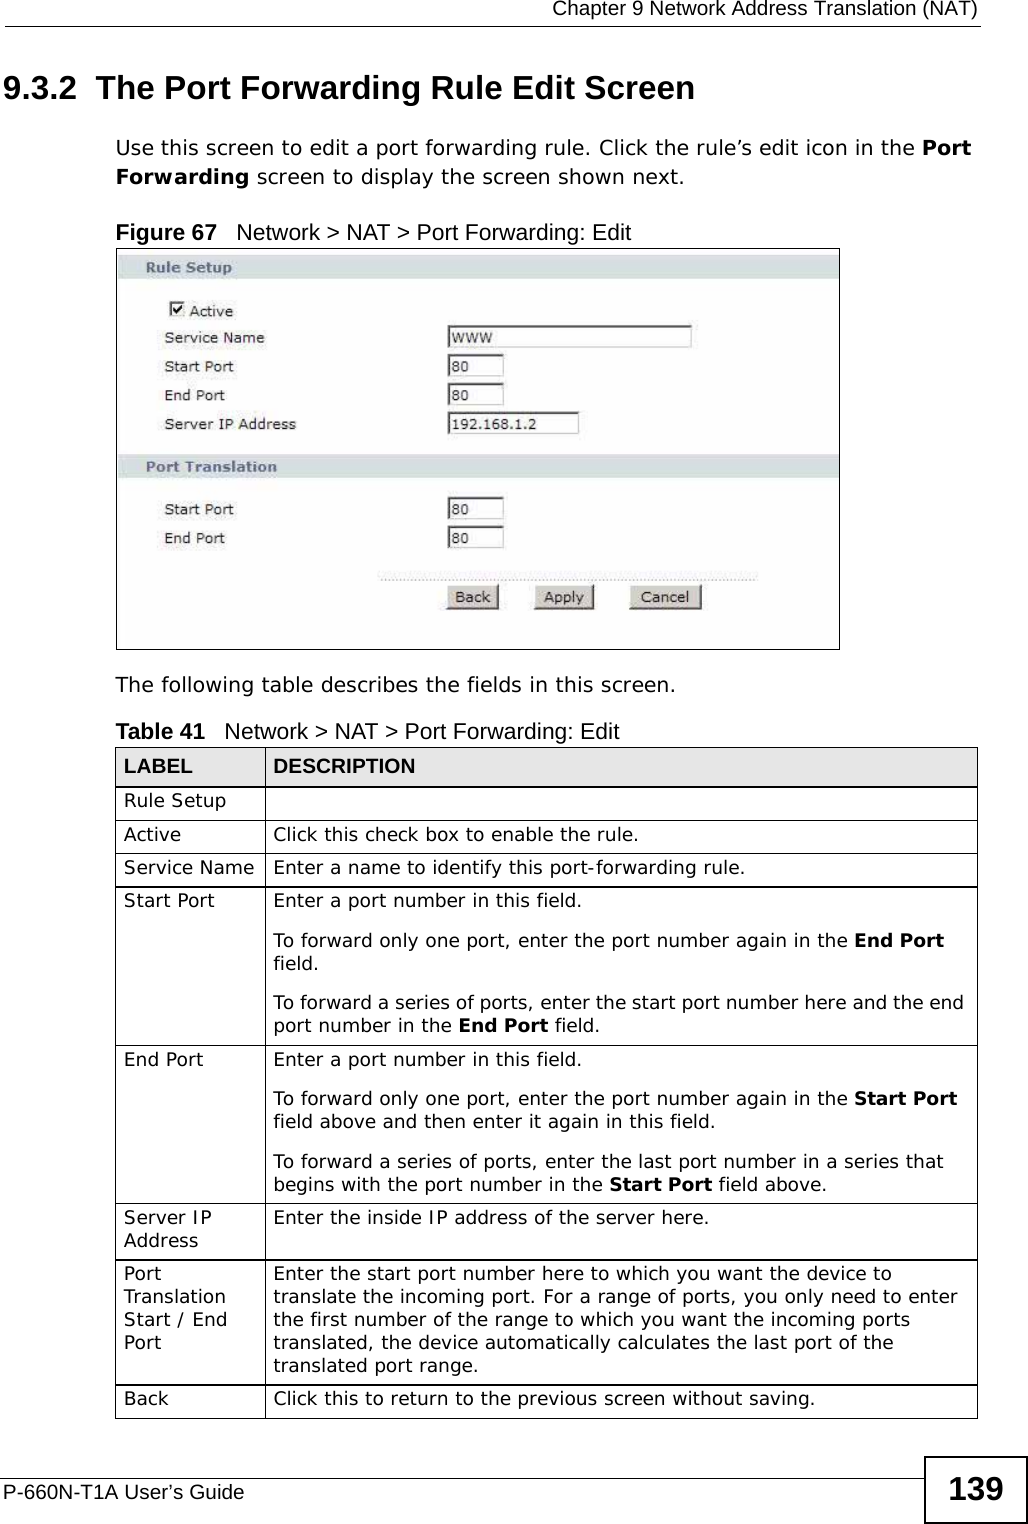  Chapter 9 Network Address Translation (NAT)P-660N-T1A User’s Guide 1399.3.2  The Port Forwarding Rule Edit ScreenUse this screen to edit a port forwarding rule. Click the rule’s edit icon in the Port Forwarding screen to display the screen shown next.Figure 67   Network &gt; NAT &gt; Port Forwarding: Edit The following table describes the fields in this screen.Table 41   Network &gt; NAT &gt; Port Forwarding: Edit LABEL DESCRIPTIONRule SetupActive Click this check box to enable the rule.Service Name Enter a name to identify this port-forwarding rule.Start Port  Enter a port number in this field. To forward only one port, enter the port number again in the End Port field. To forward a series of ports, enter the start port number here and the end port number in the End Port field.End Port  Enter a port number in this field. To forward only one port, enter the port number again in the Start Port field above and then enter it again in this field. To forward a series of ports, enter the last port number in a series that begins with the port number in the Start Port field above.Server IP Address Enter the inside IP address of the server here.Port Translation Start / End PortEnter the start port number here to which you want the device to translate the incoming port. For a range of ports, you only need to enter the first number of the range to which you want the incoming ports translated, the device automatically calculates the last port of the translated port range.Back Click this to return to the previous screen without saving.